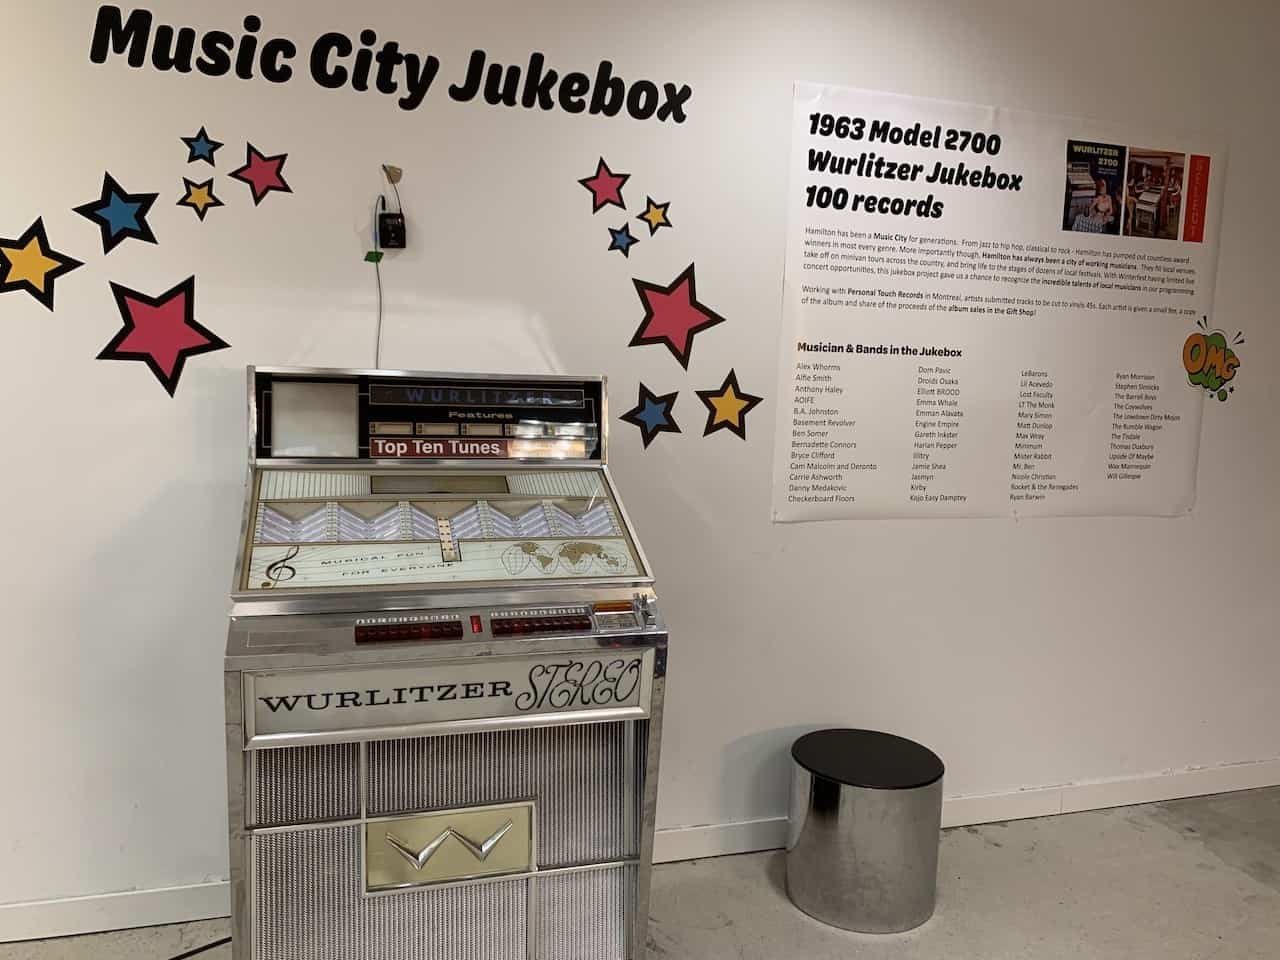 Hamilton Winterfest Pop Local Artists Jukebox - This 1960's Wurlitzer Jukebox at Hamilton Winterfest Pop was filled with music from local Hamilton musicians in Hamilton, Ontario, Canada.